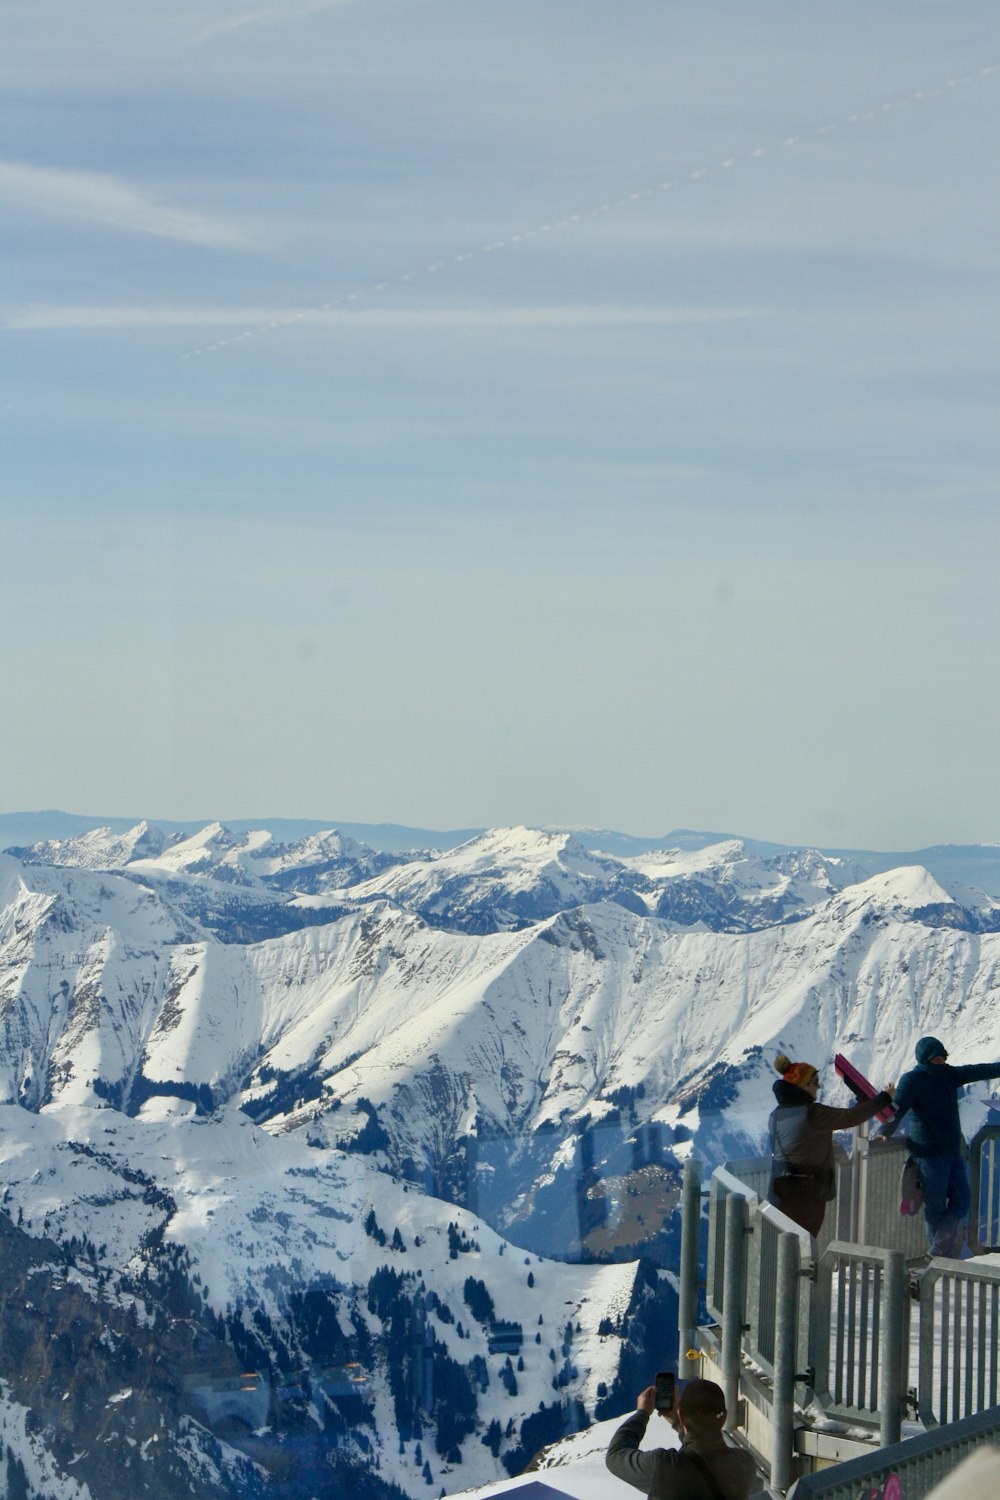 a group of people standing on top of a snow covered mountain